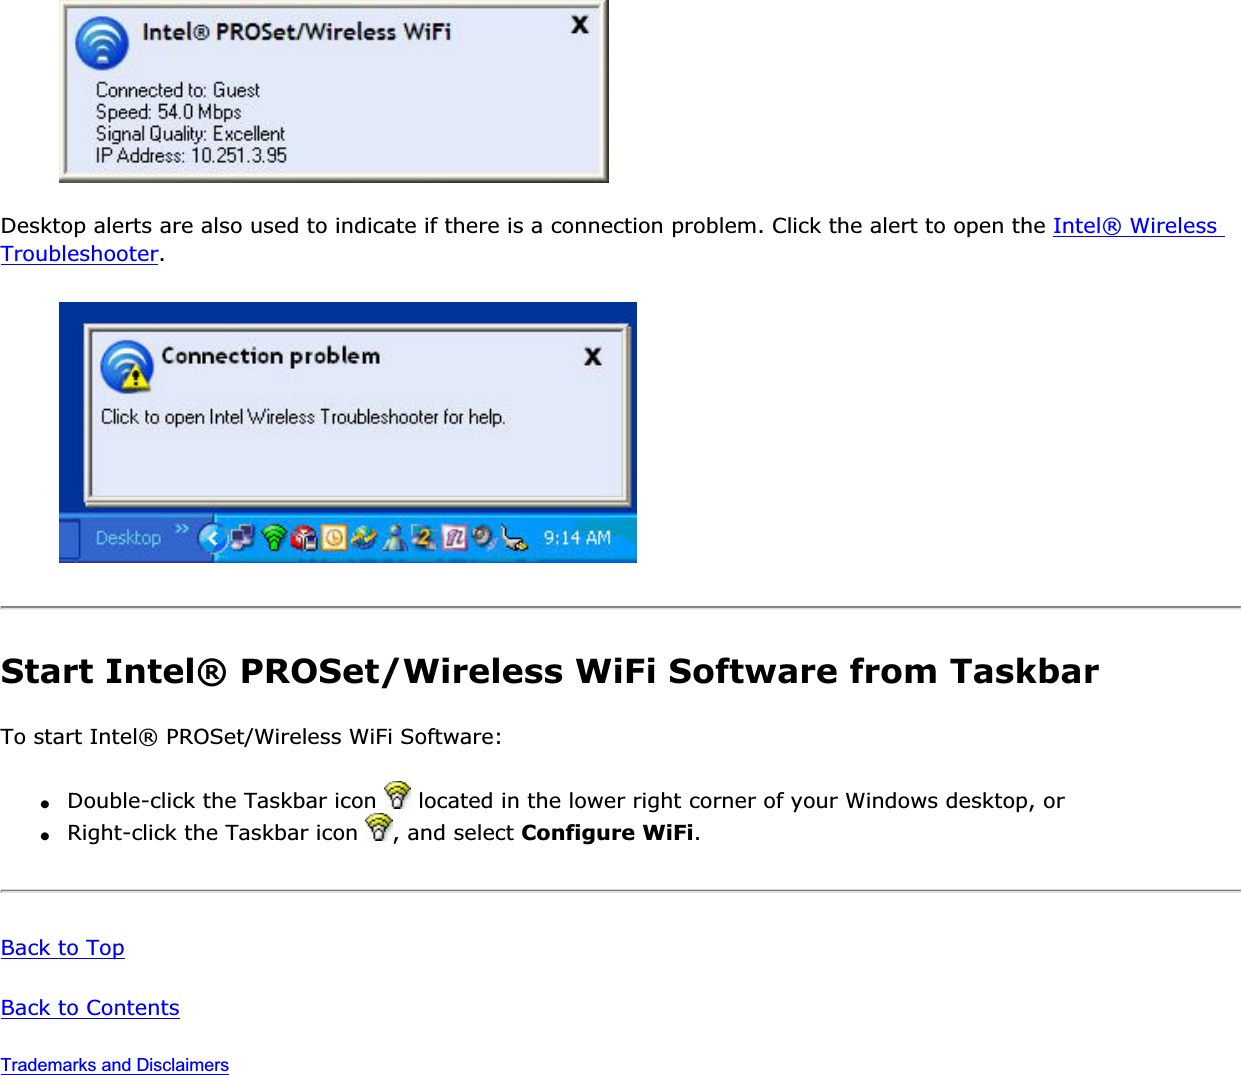 Desktop alerts are also used to indicate if there is a connection problem. Click the alert to open the Intel® Wireless Troubleshooter.Start Intel® PROSet/Wireless WiFi Software from TaskbarTo start Intel® PROSet/Wireless WiFi Software: ●Double-click the Taskbar icon   located in the lower right corner of your Windows desktop, or●Right-click the Taskbar icon  , and select Configure WiFi.Back to TopBack to ContentsTrademarks and Disclaimers